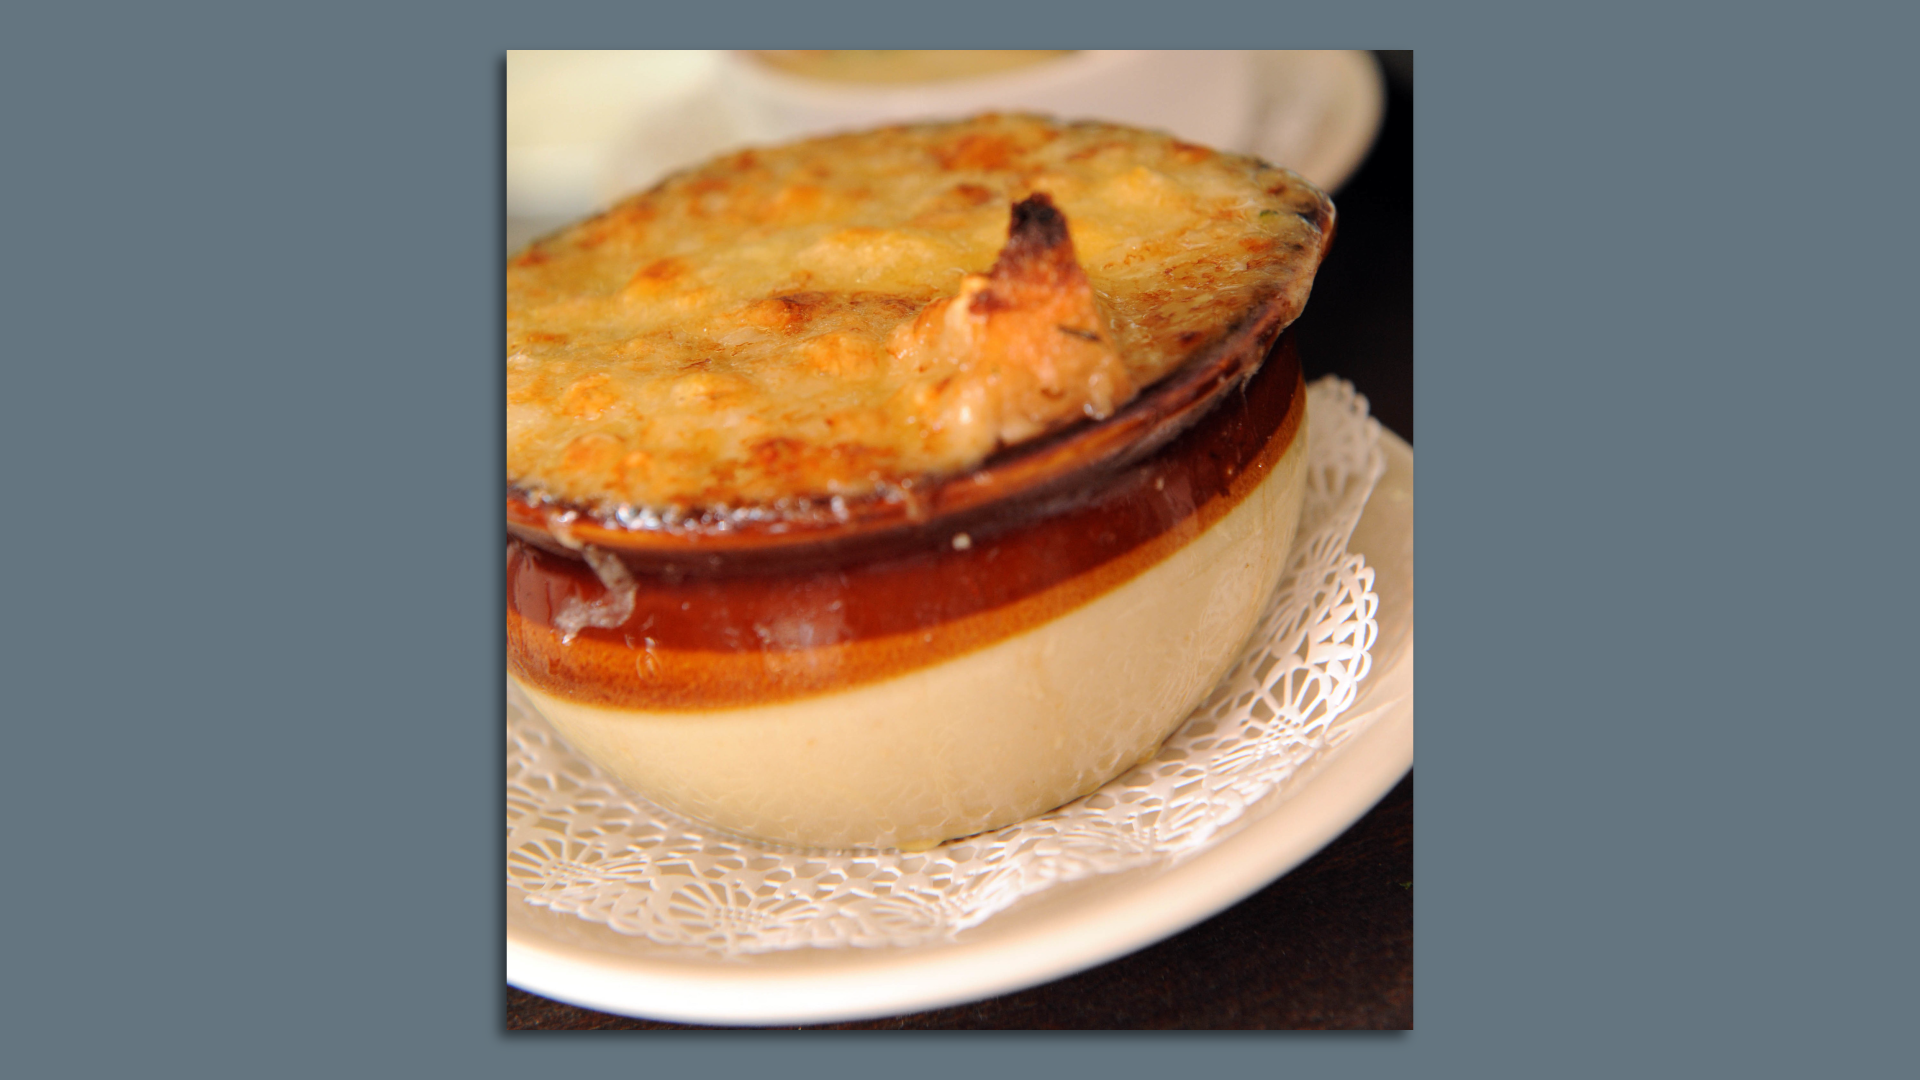 Photo shows a bowl of French onion soup